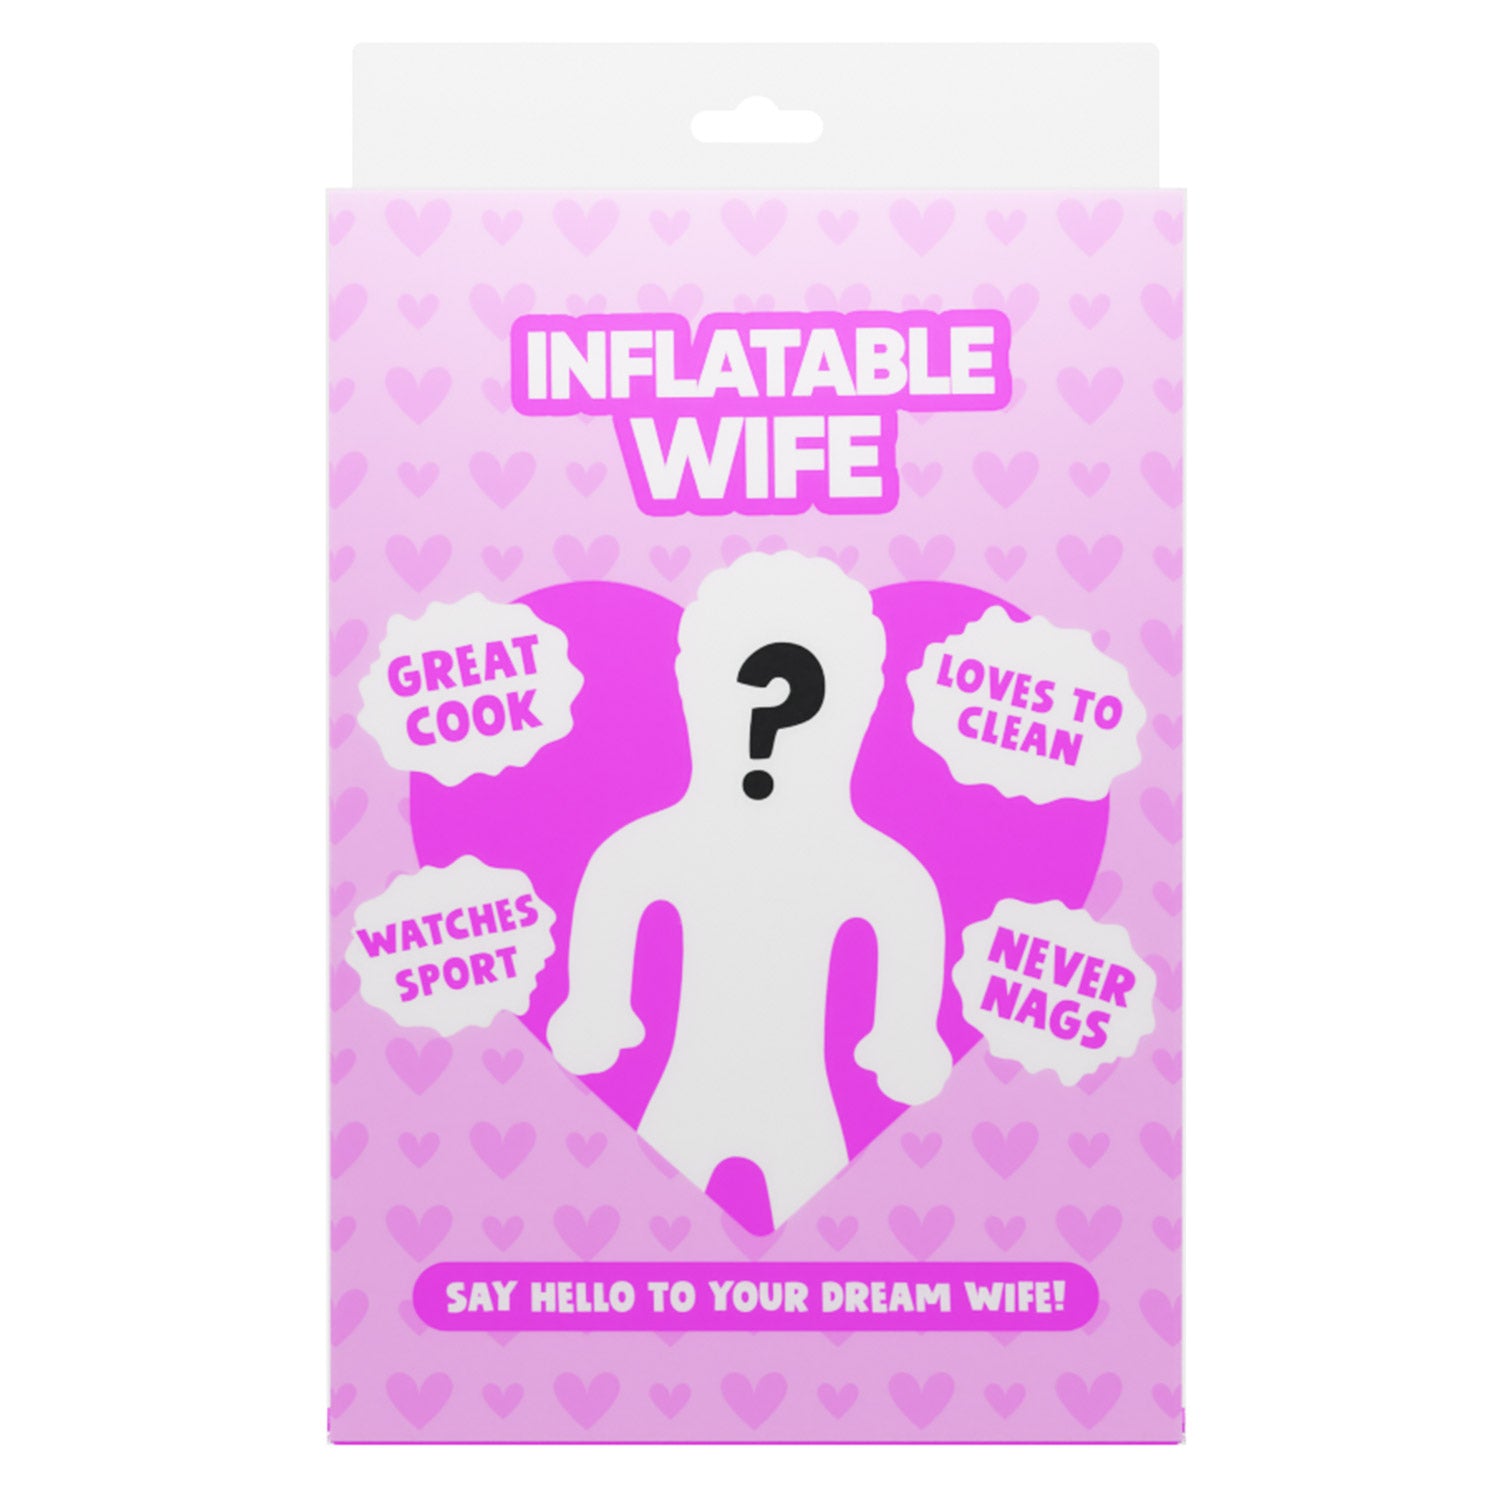 Inflatable Wife Box